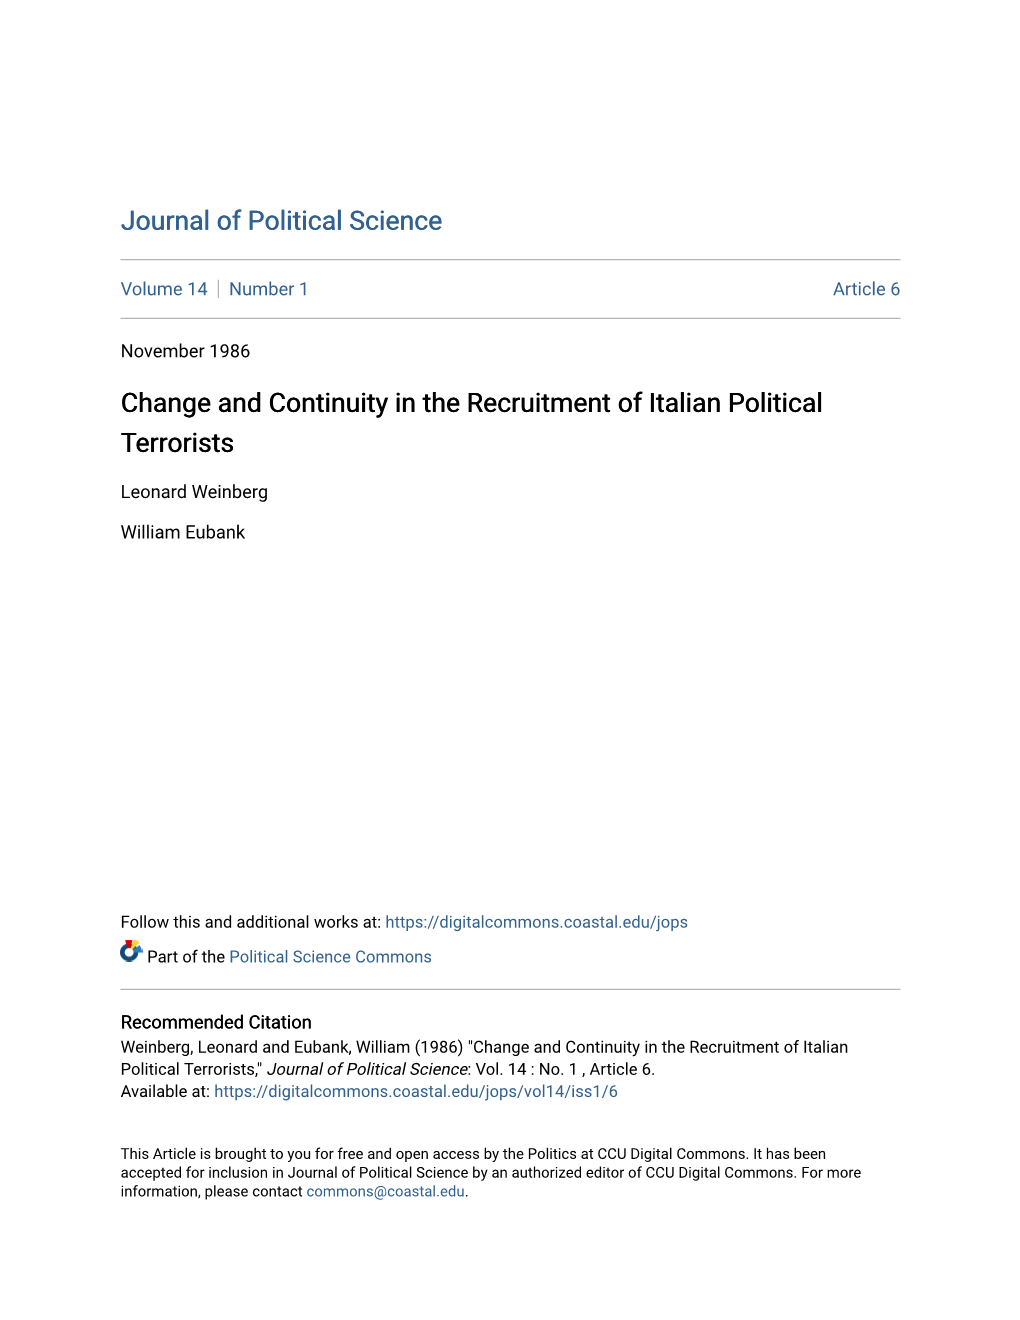 Change and Continuity in the Recruitment of Italian Political Terrorists